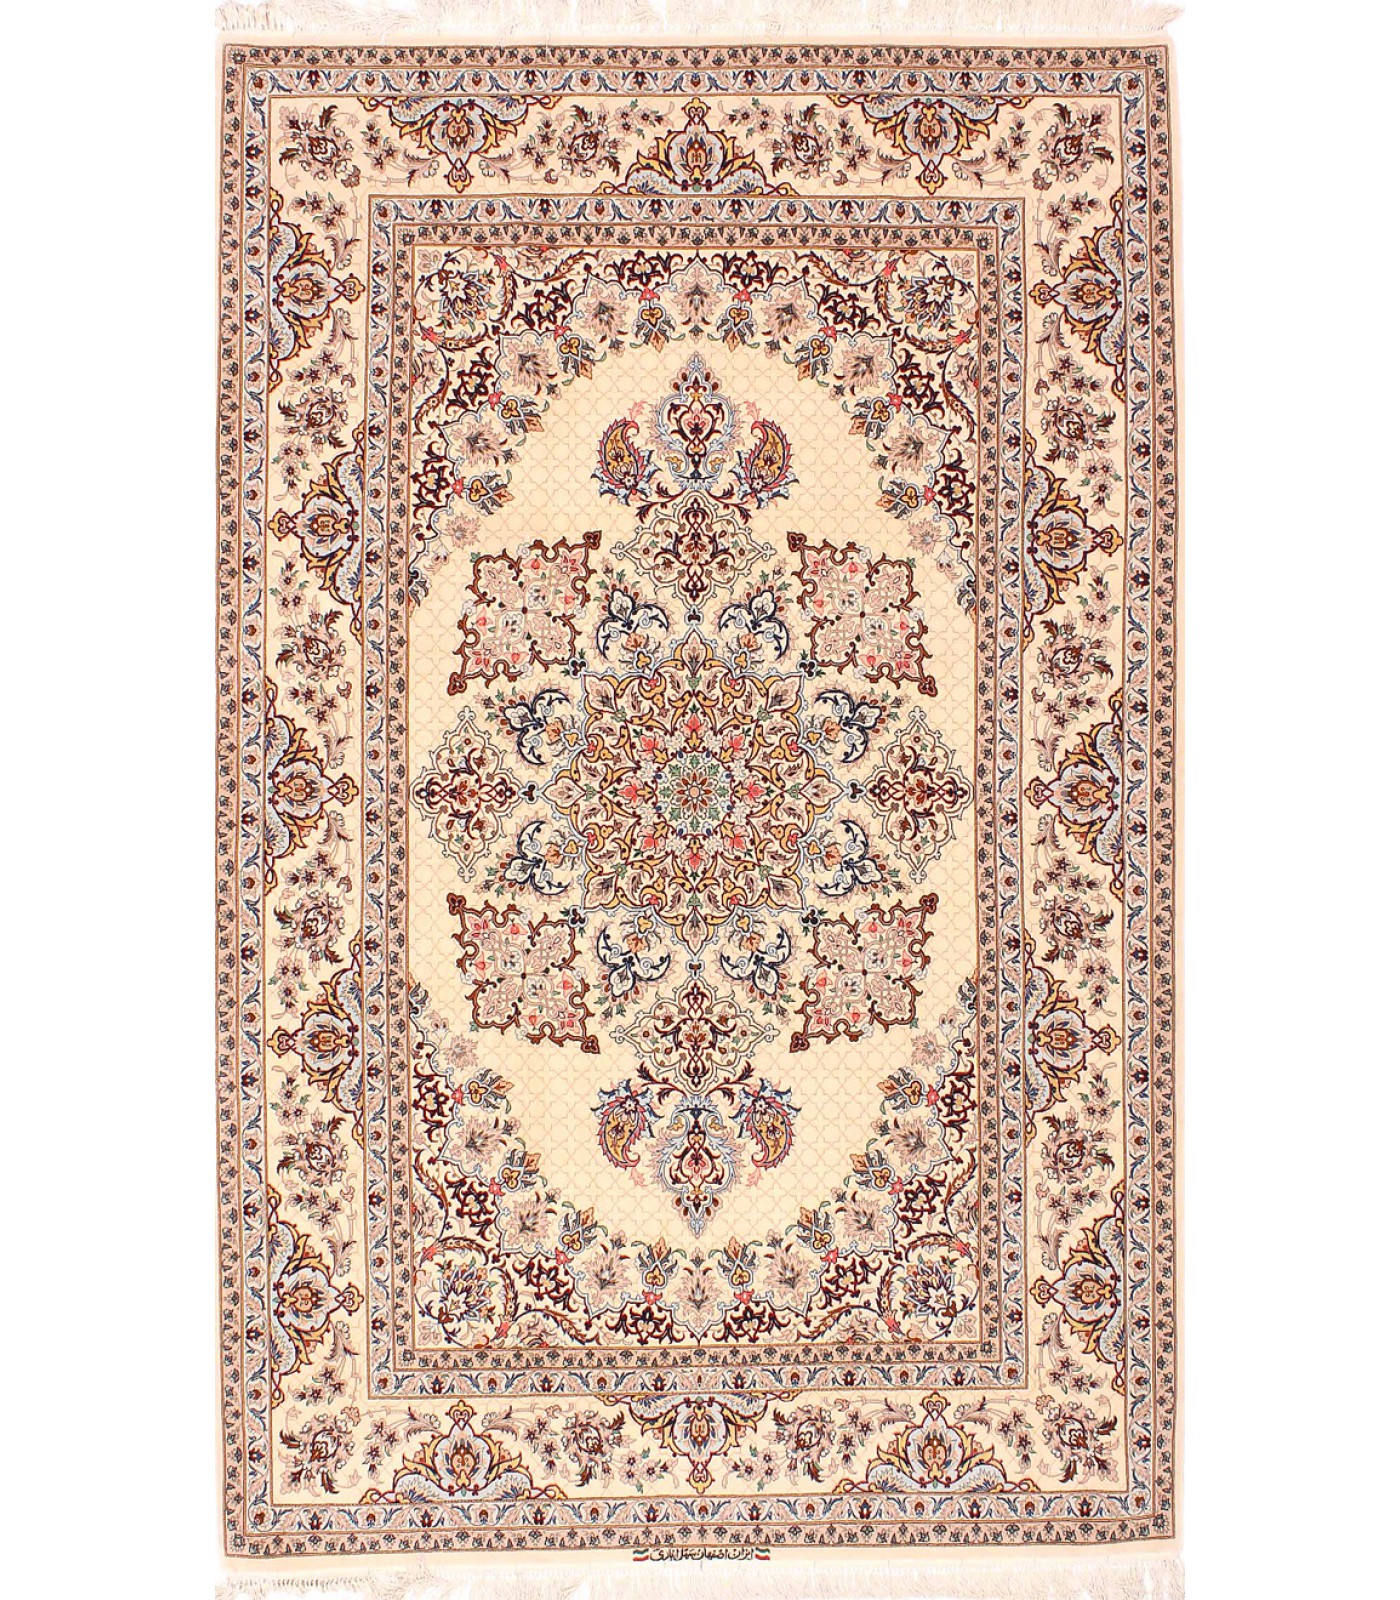 Antique India Agra Rugs and Carpet Collection